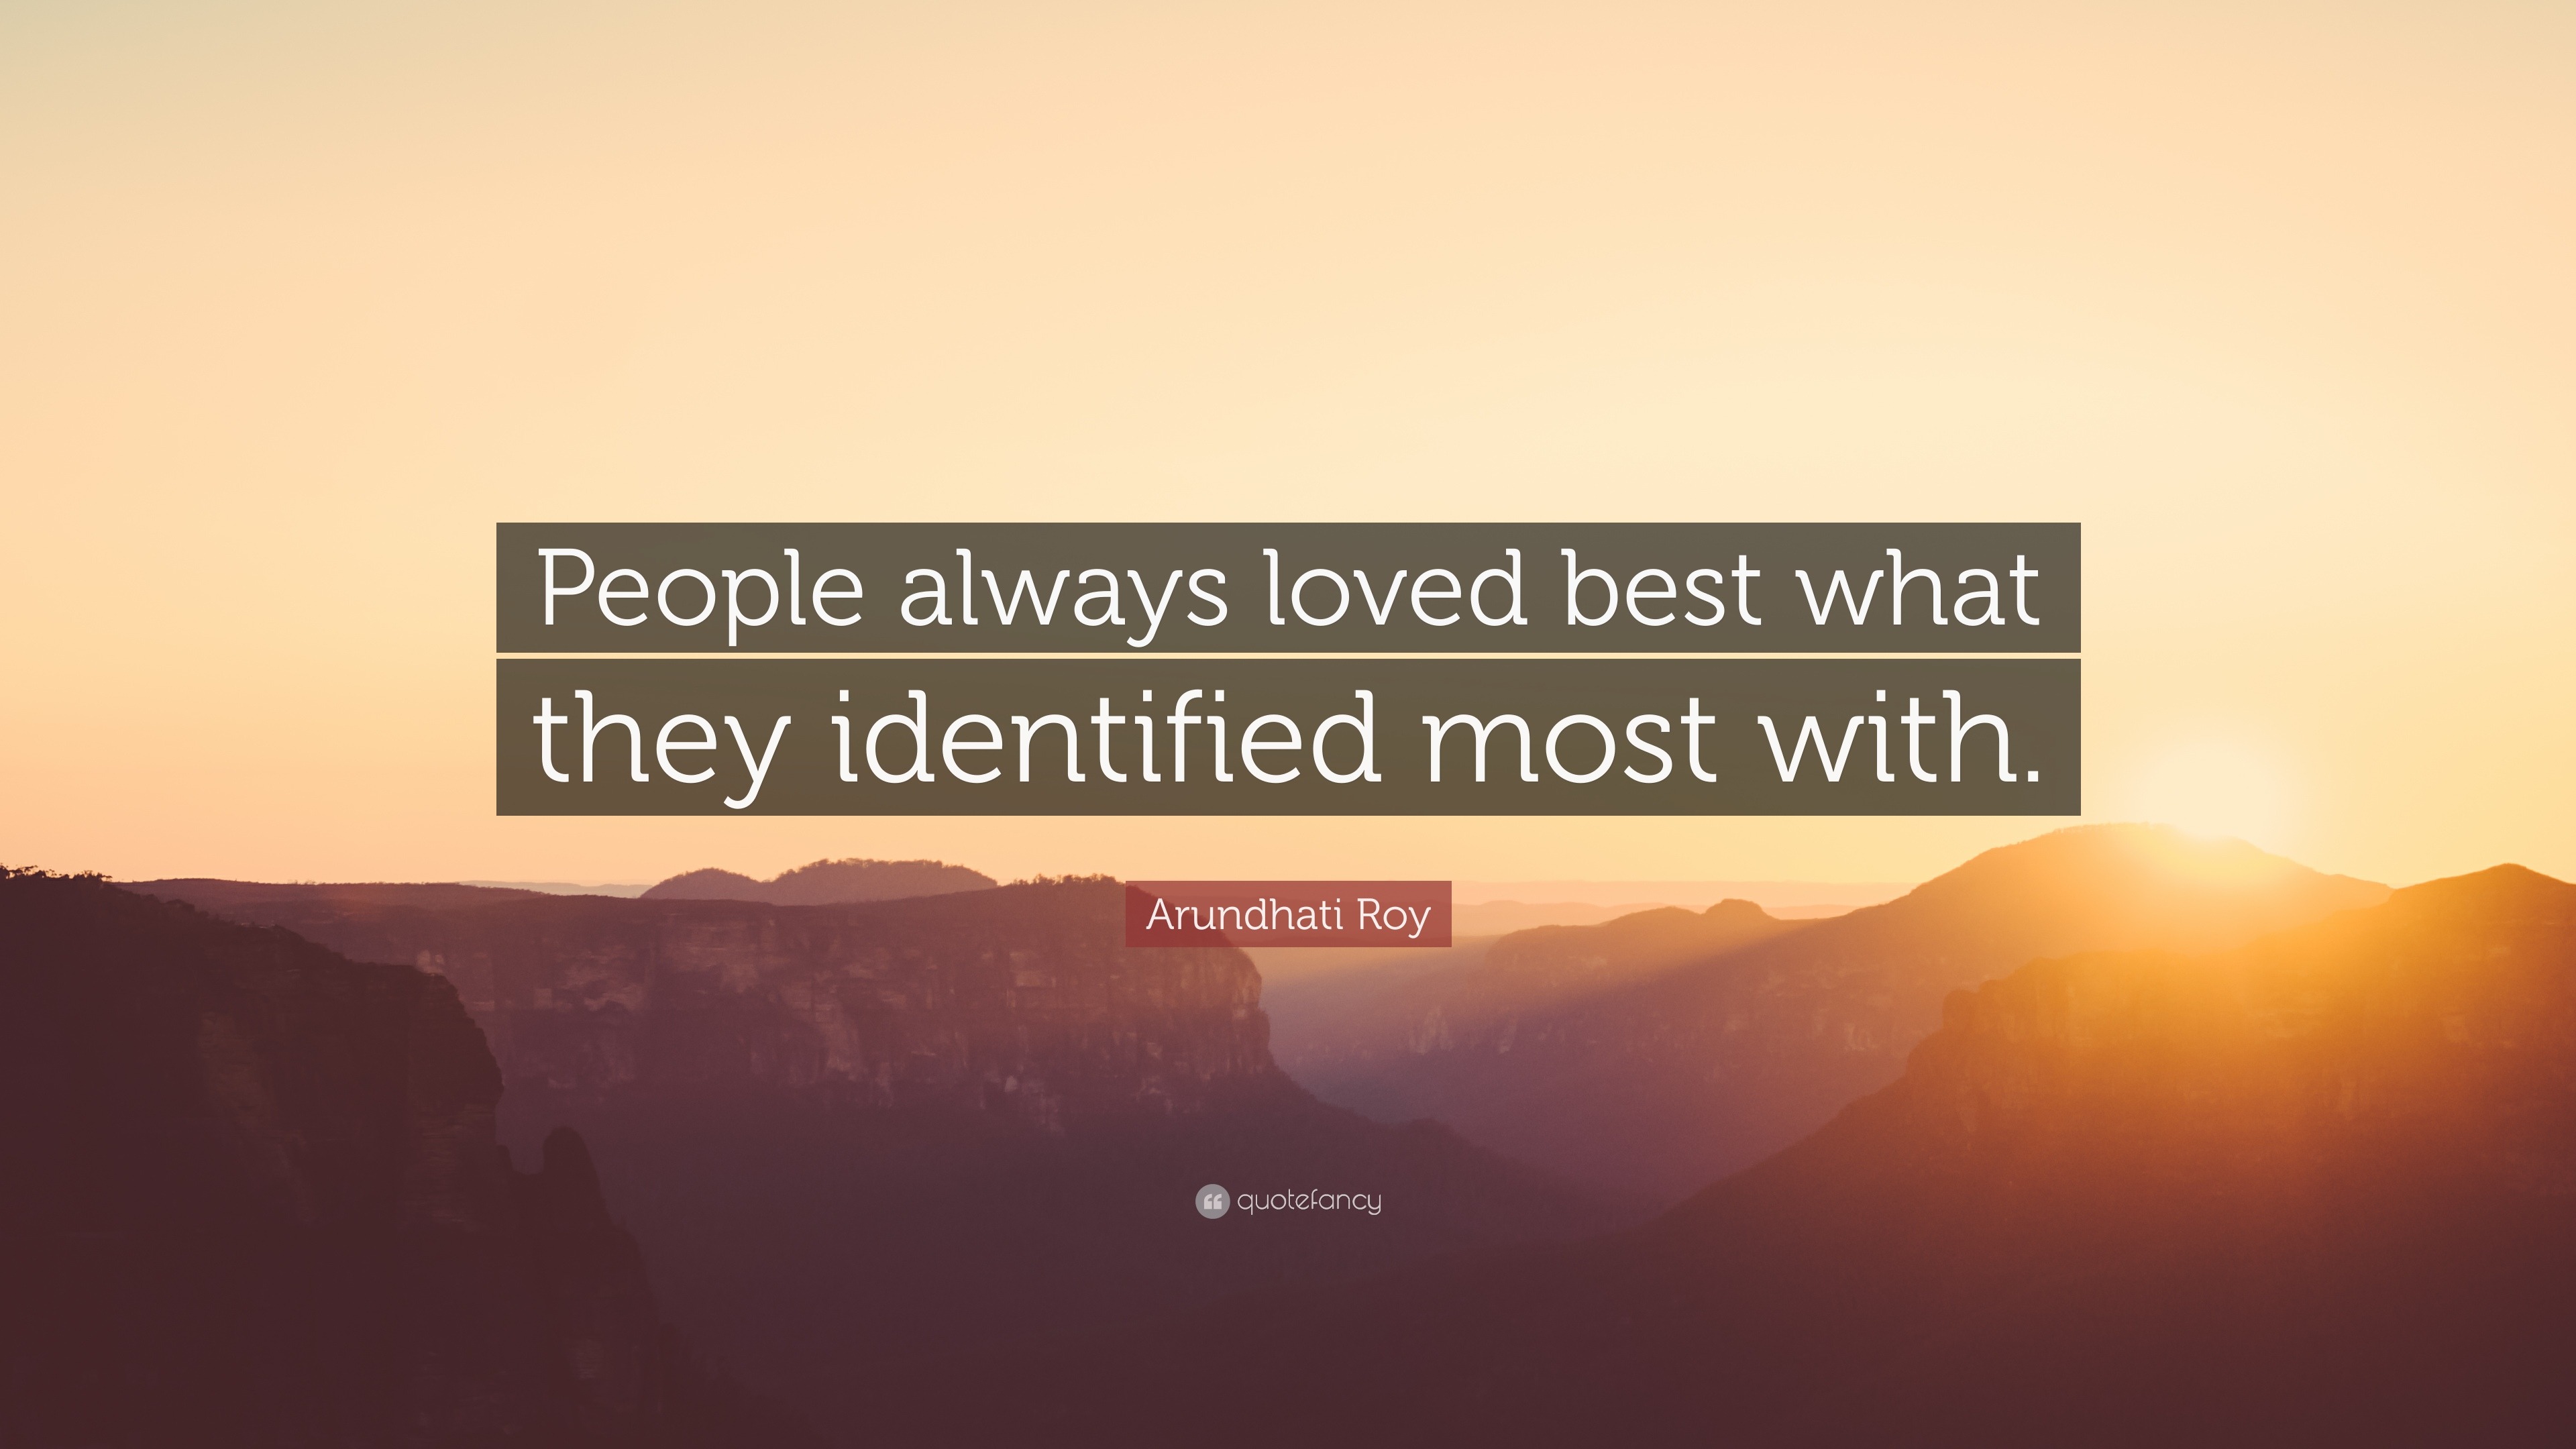 Arundhati Roy Quote: “People always loved best what they